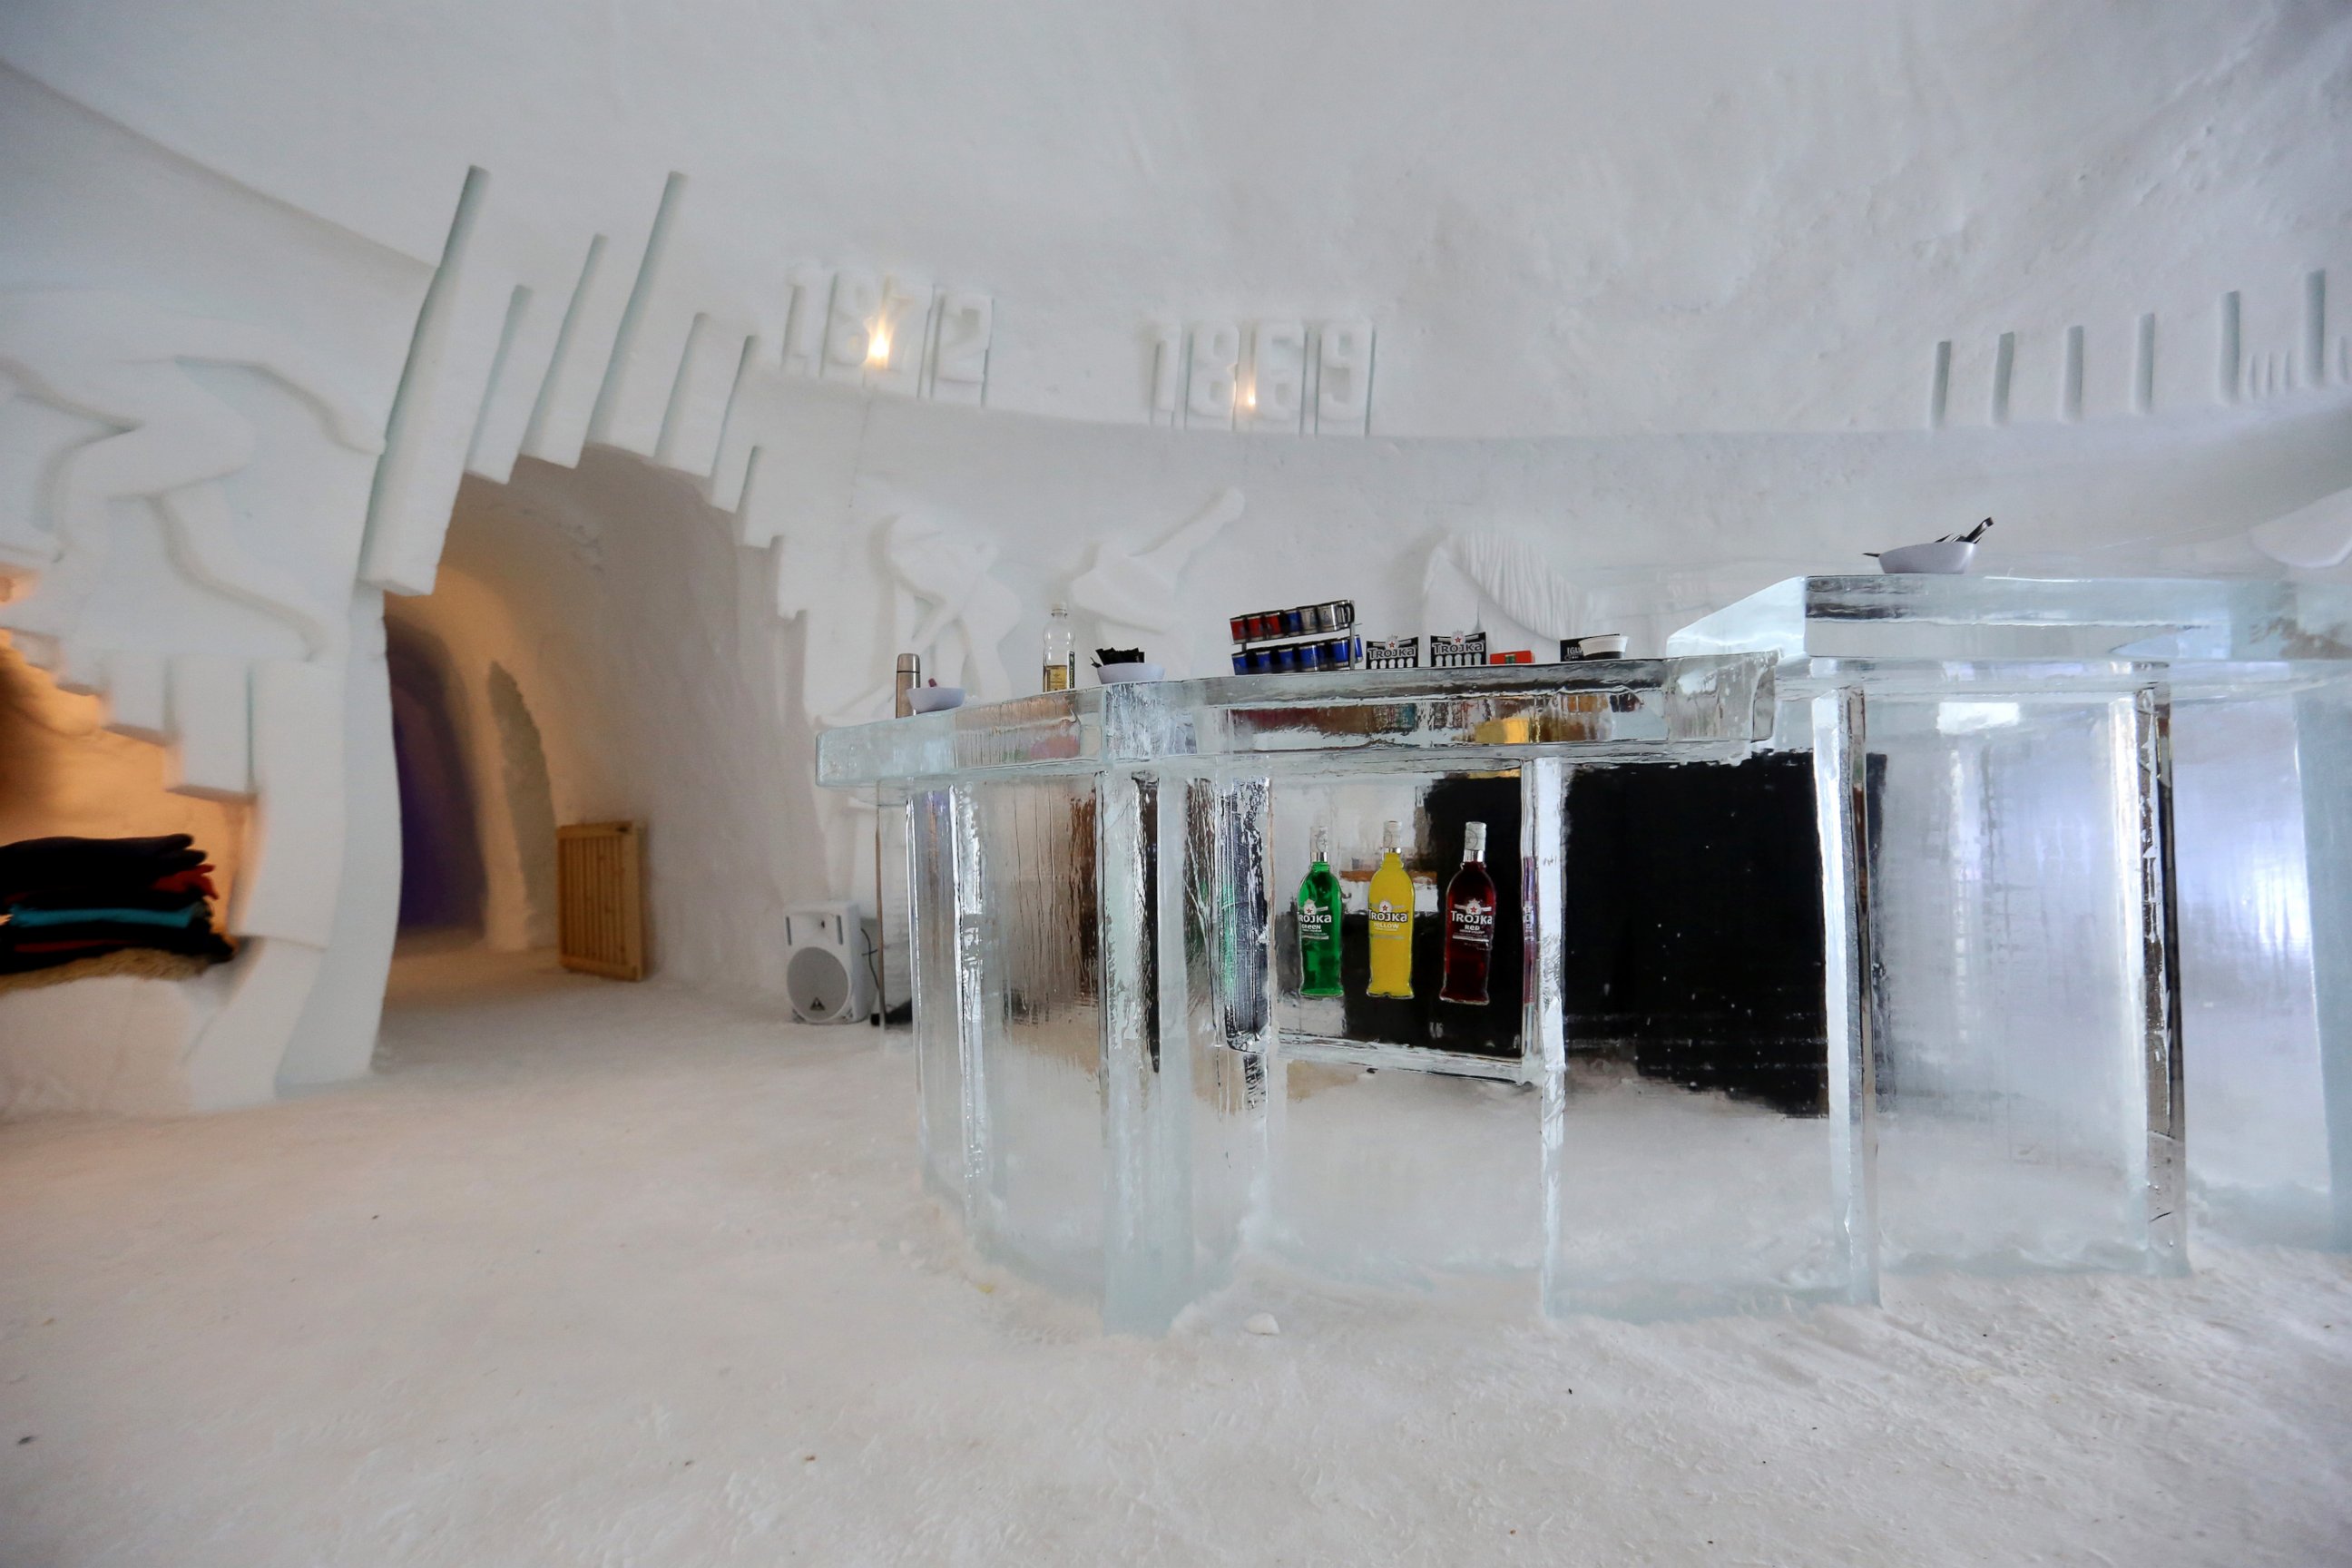 PHOTO: Bottles of red, green and yellow colored spirits sit encased in ice in the bar area at the luxury igloo ice hotel, operated by Iglu-Dorf, on the Parsenn mountain above the town of Davos, Switzerland on Jan. 20, 2015.